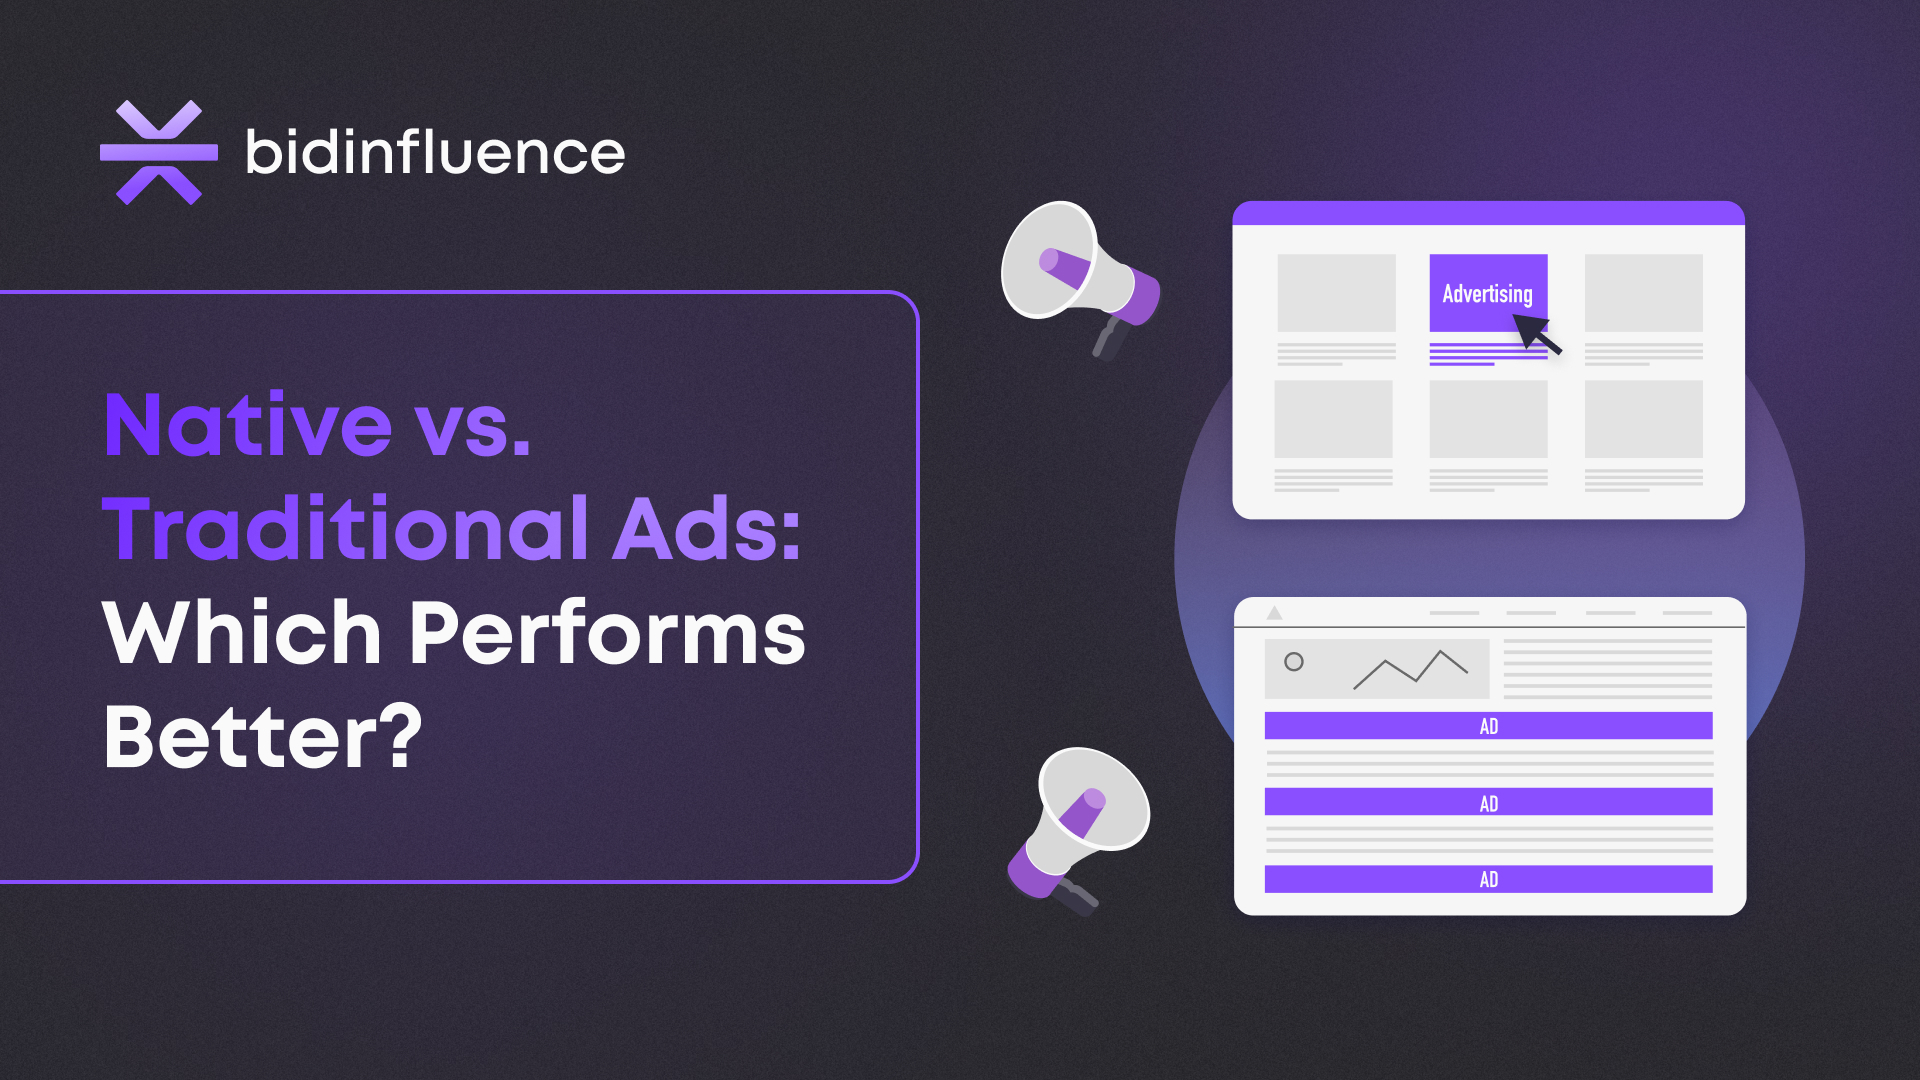 Native and Traditional ads comparison